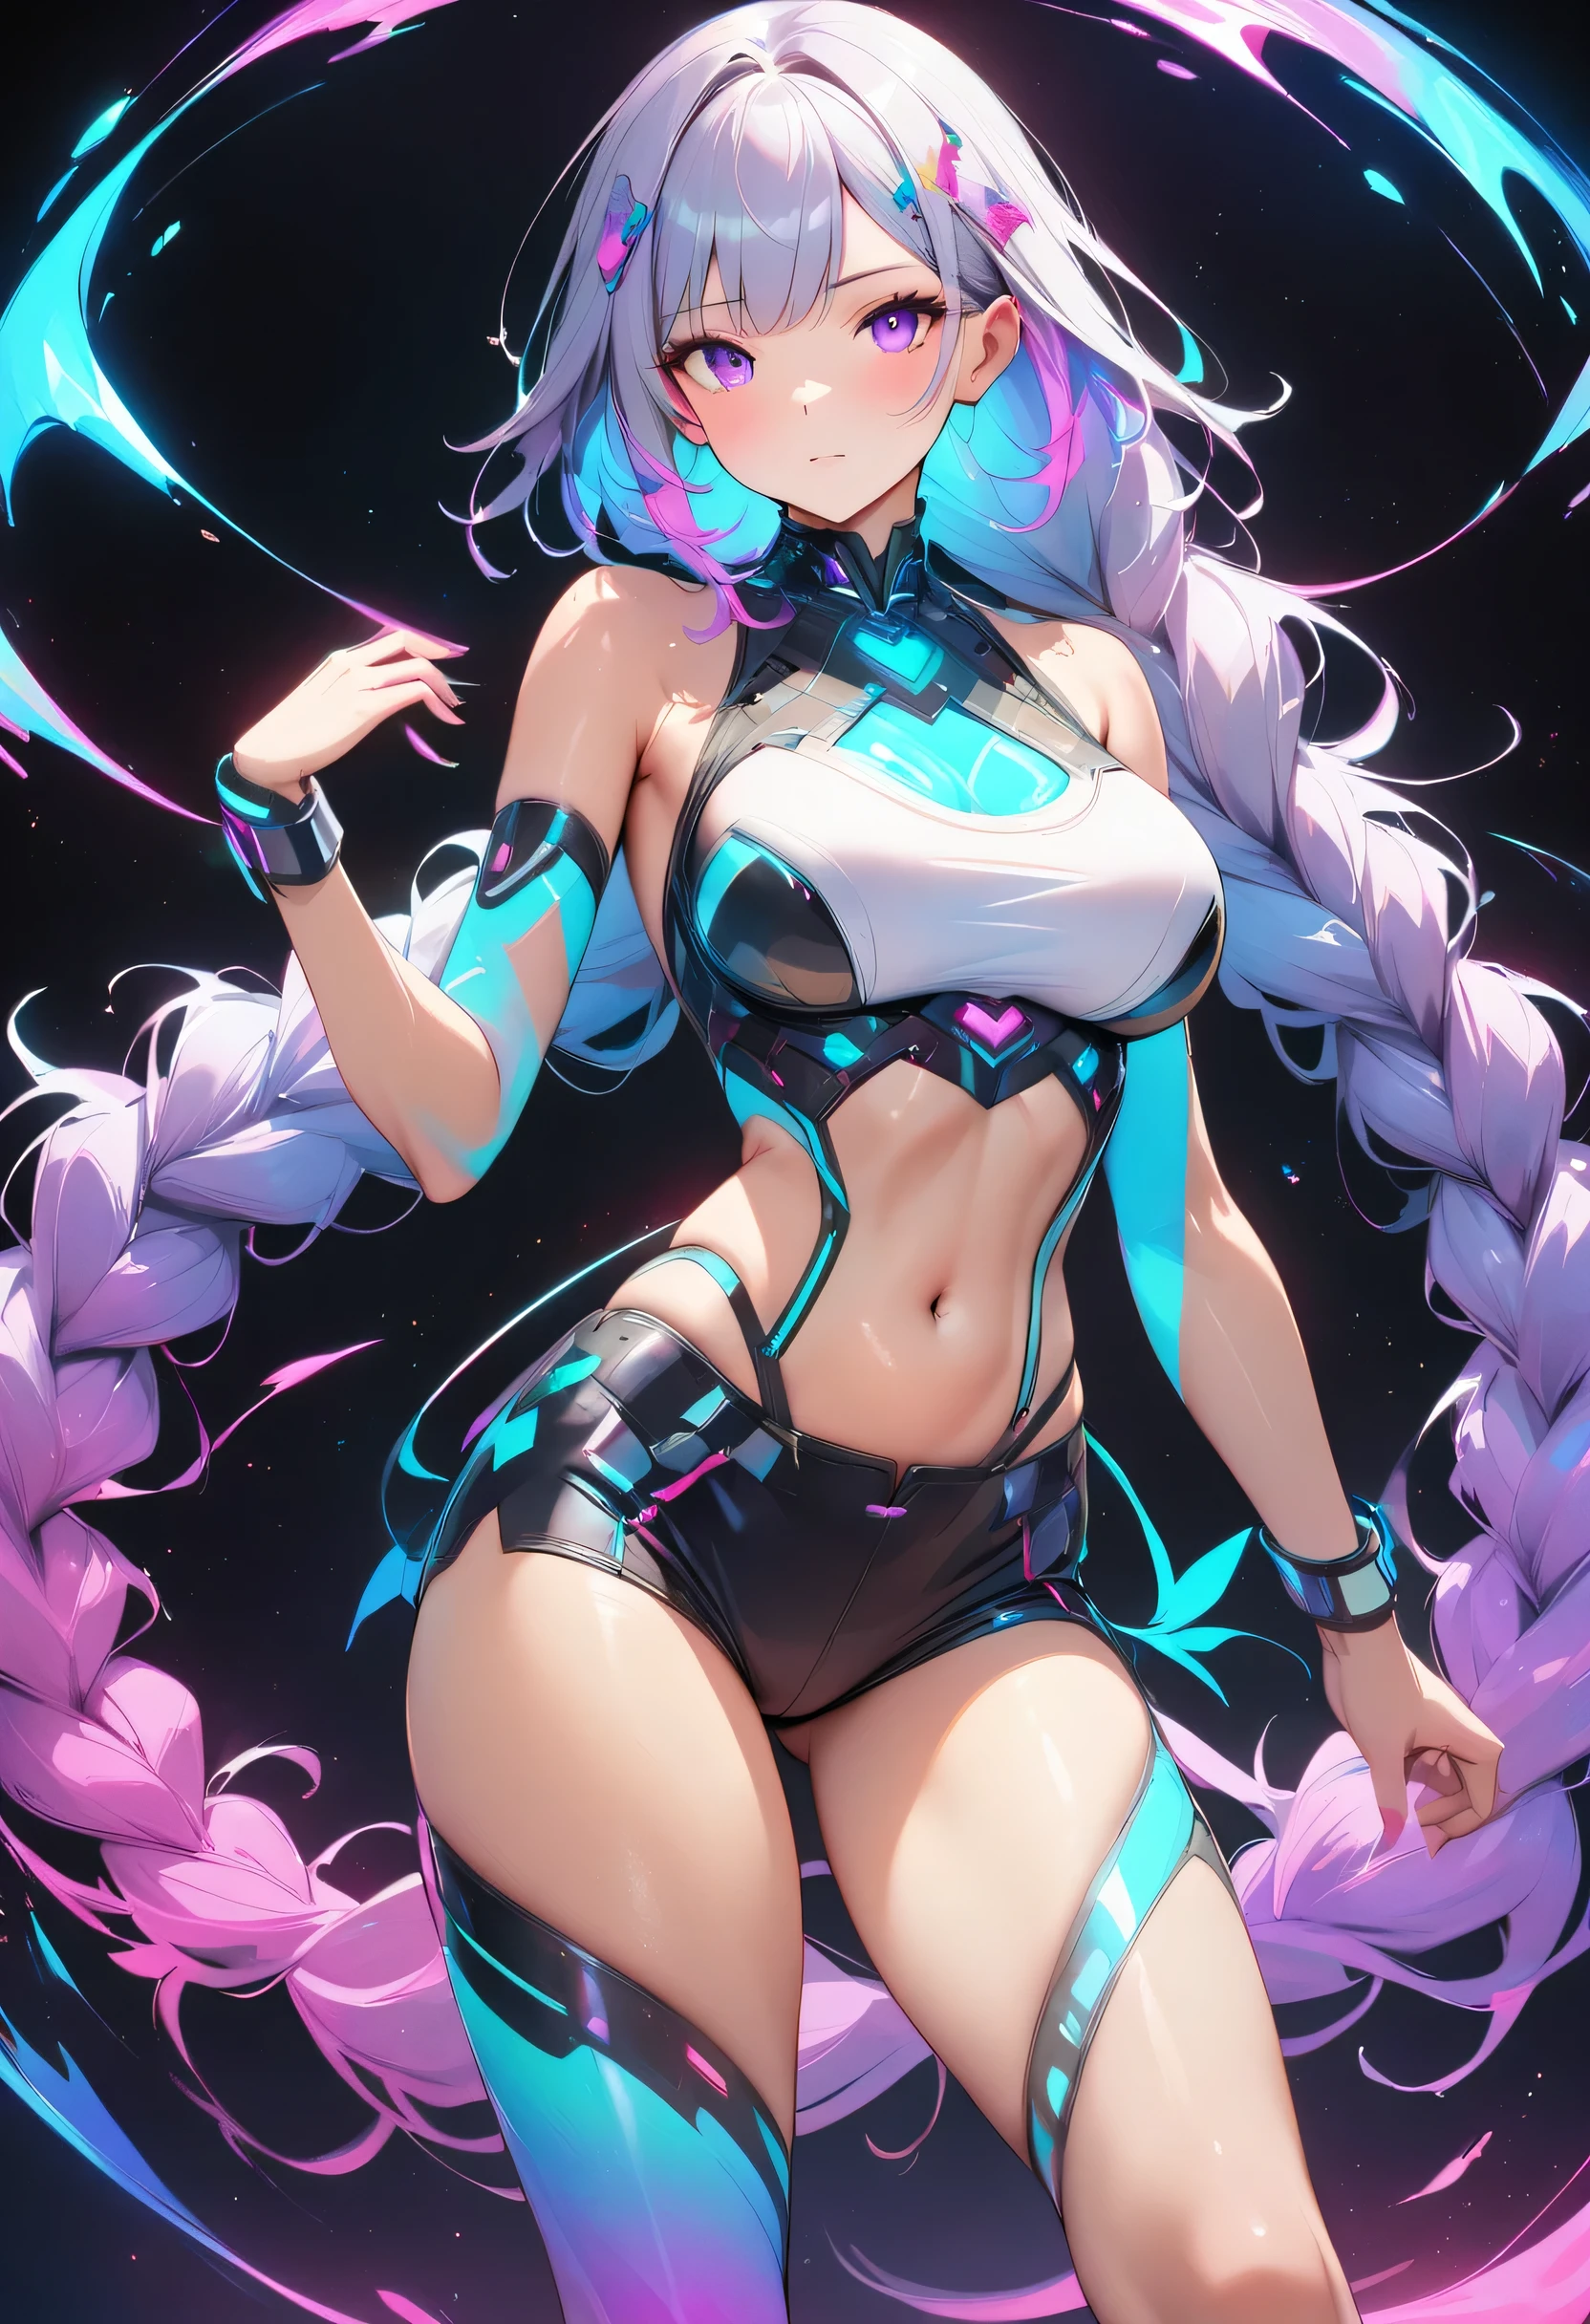 holography, Draw in neon colors:1 girl,yinji,1girl,solo,purple_hair,purple_eyes,very_long_hair,grey_hair,braided_ponytail,large_breasts,gradient_hair,, beautiful, (Very long braided light purple hair),Bare shoulders,belly button,Short spats,Silver sports bra,healthy,Expressionless,future,transparent,((Light)), sf, Digital art, Digital, scientific, Dark Background: Draw electronic circuits in neon colors, masterpiece, Digital space, energy, ((beautiful)), masterpiece, 8k, become close, Vibrant, colorful, Nice, Rich colors, beautiful Light Lines. Magical Effects, Sparkling, beautiful Light Grains,Anatomically correct,highest quality, Super quality, 16k, Incredibly absurd,Watercolor painted skin,Very detailed,
